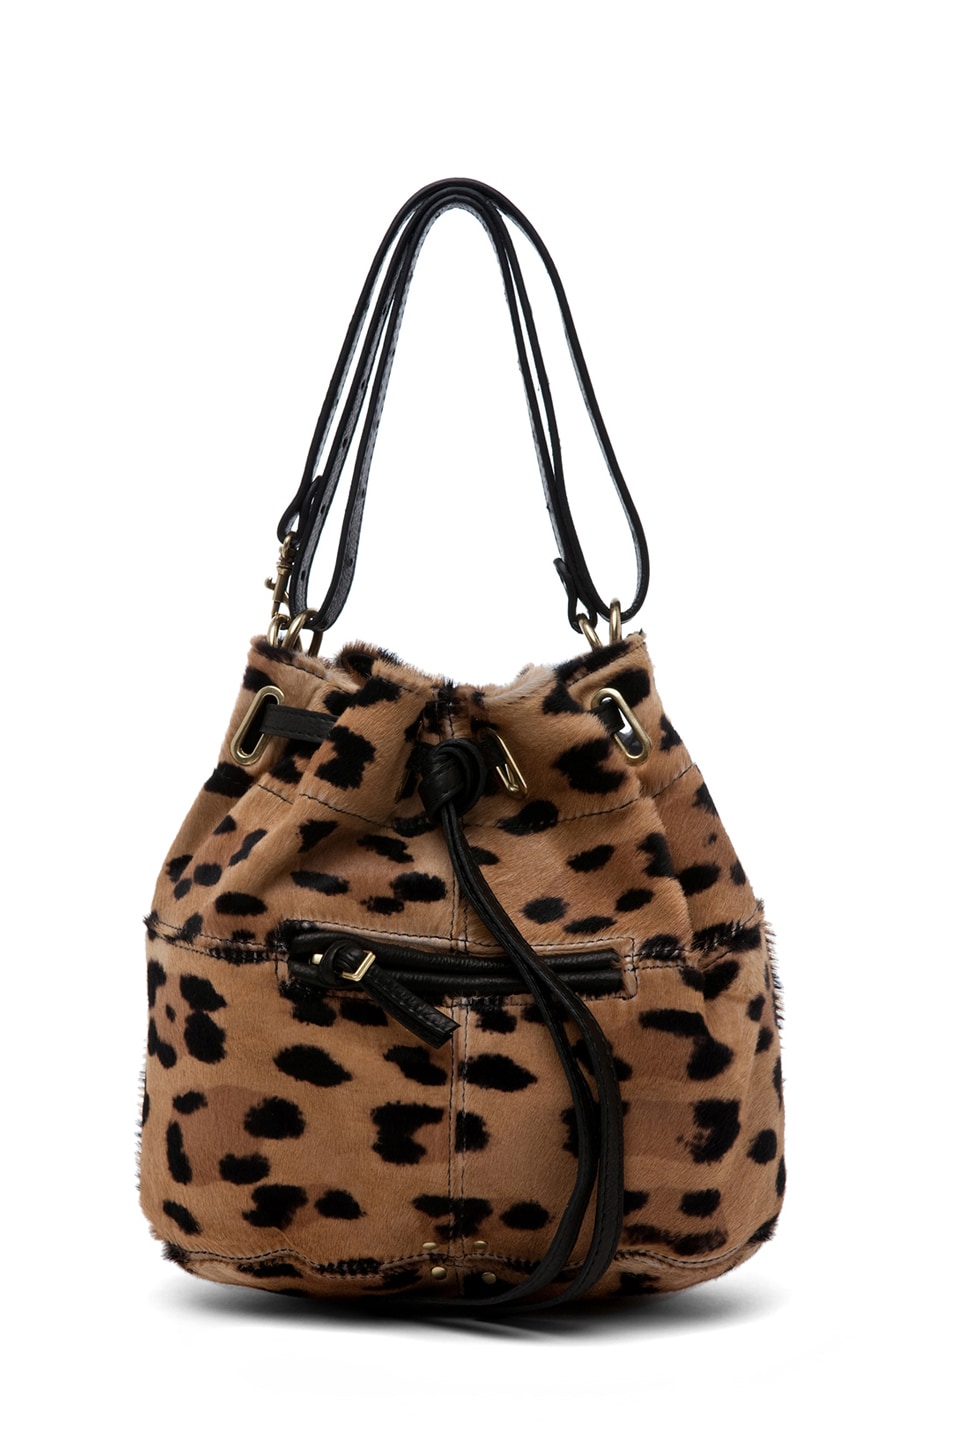 Image 1 of Jerome Dreyfuss Alain S Bag in Classic Leopard